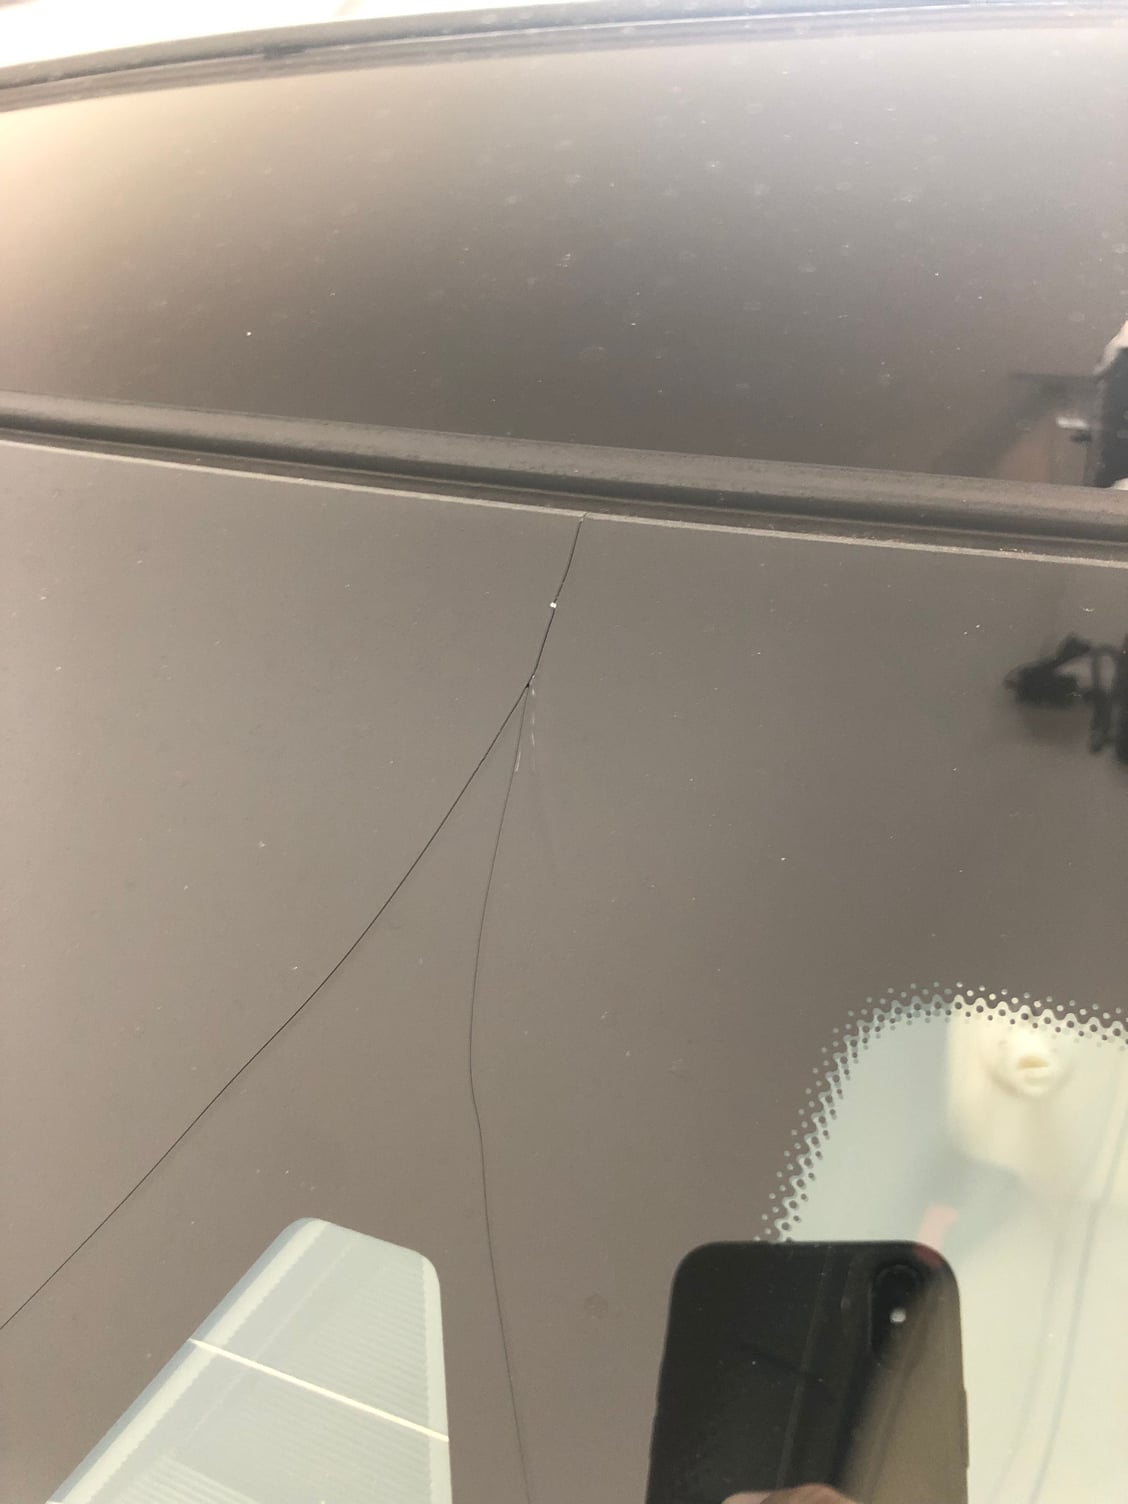 Used chemical guys water spot remover, now windshield has swirls that won't  come off. : r/Cartalk